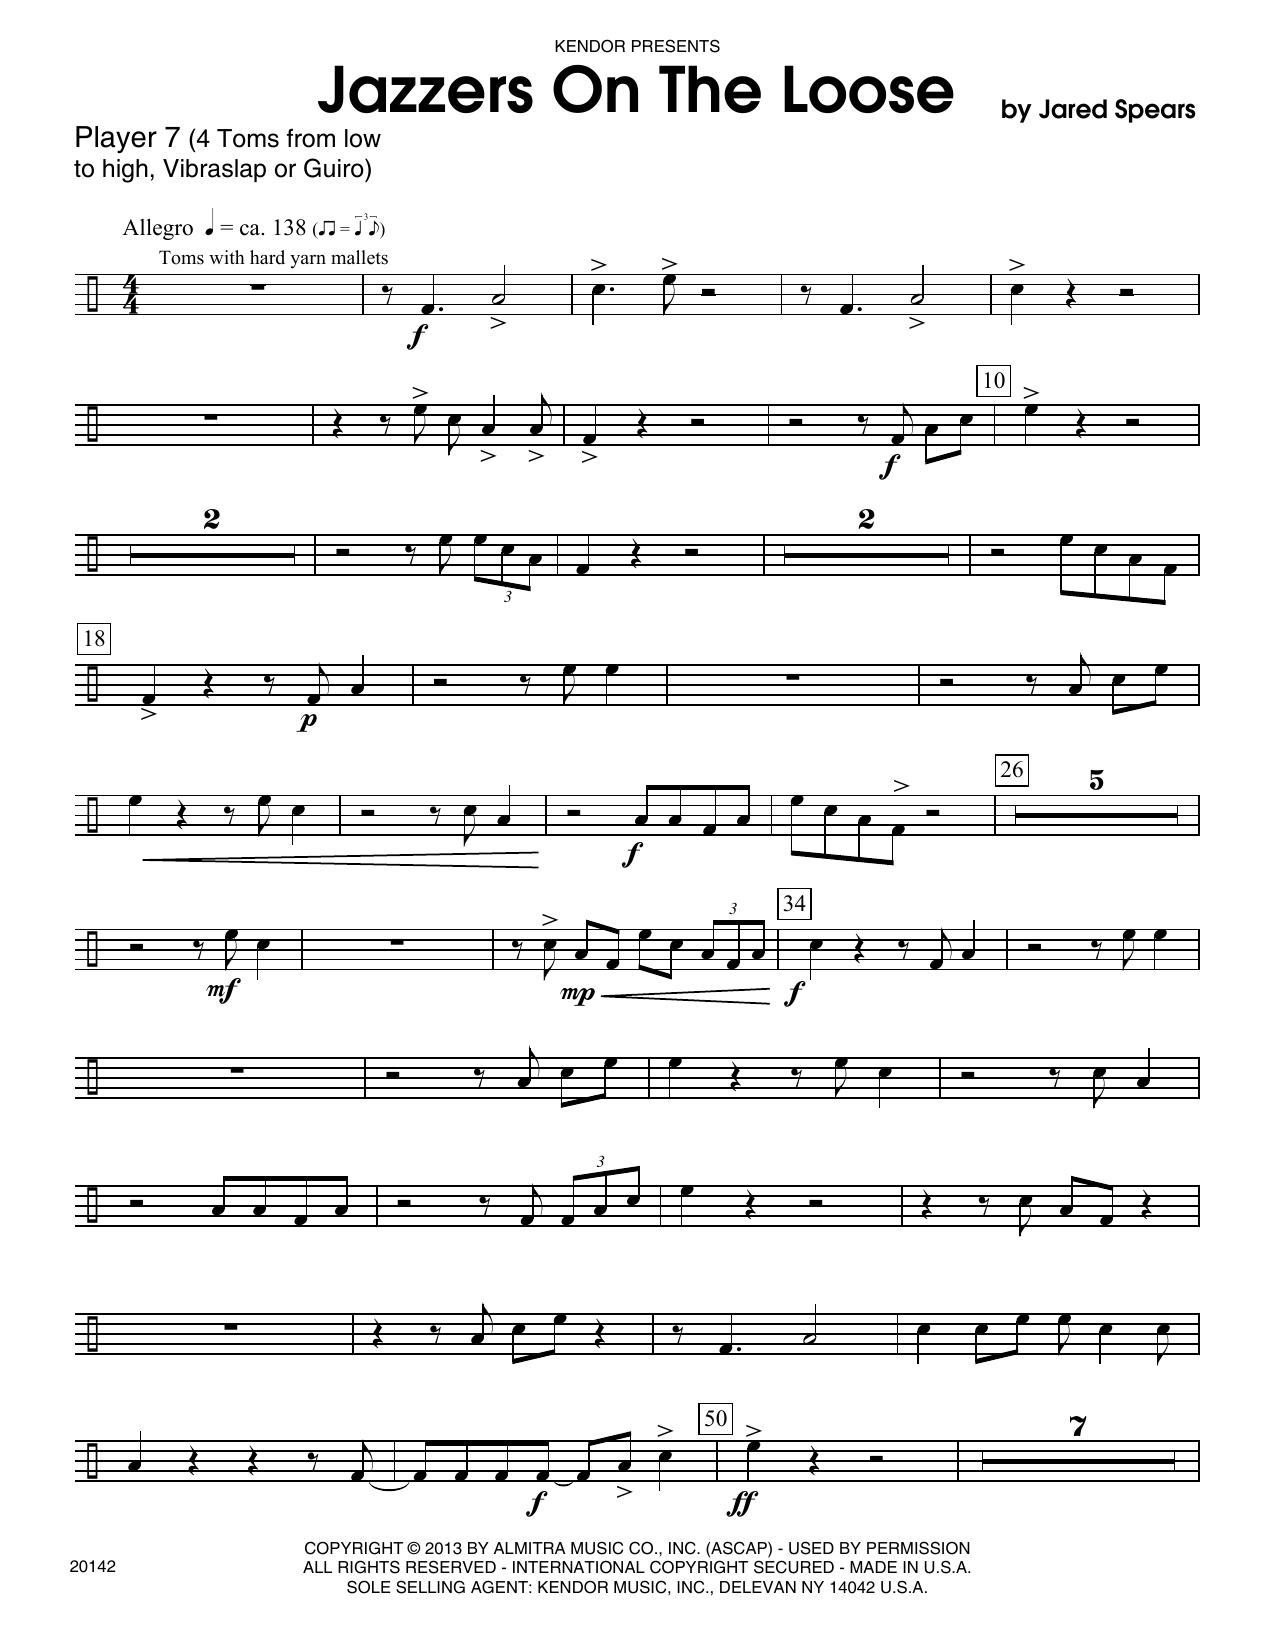 Download Jared Spears Jazzers On The Loose - Tom Toms Sheet Music